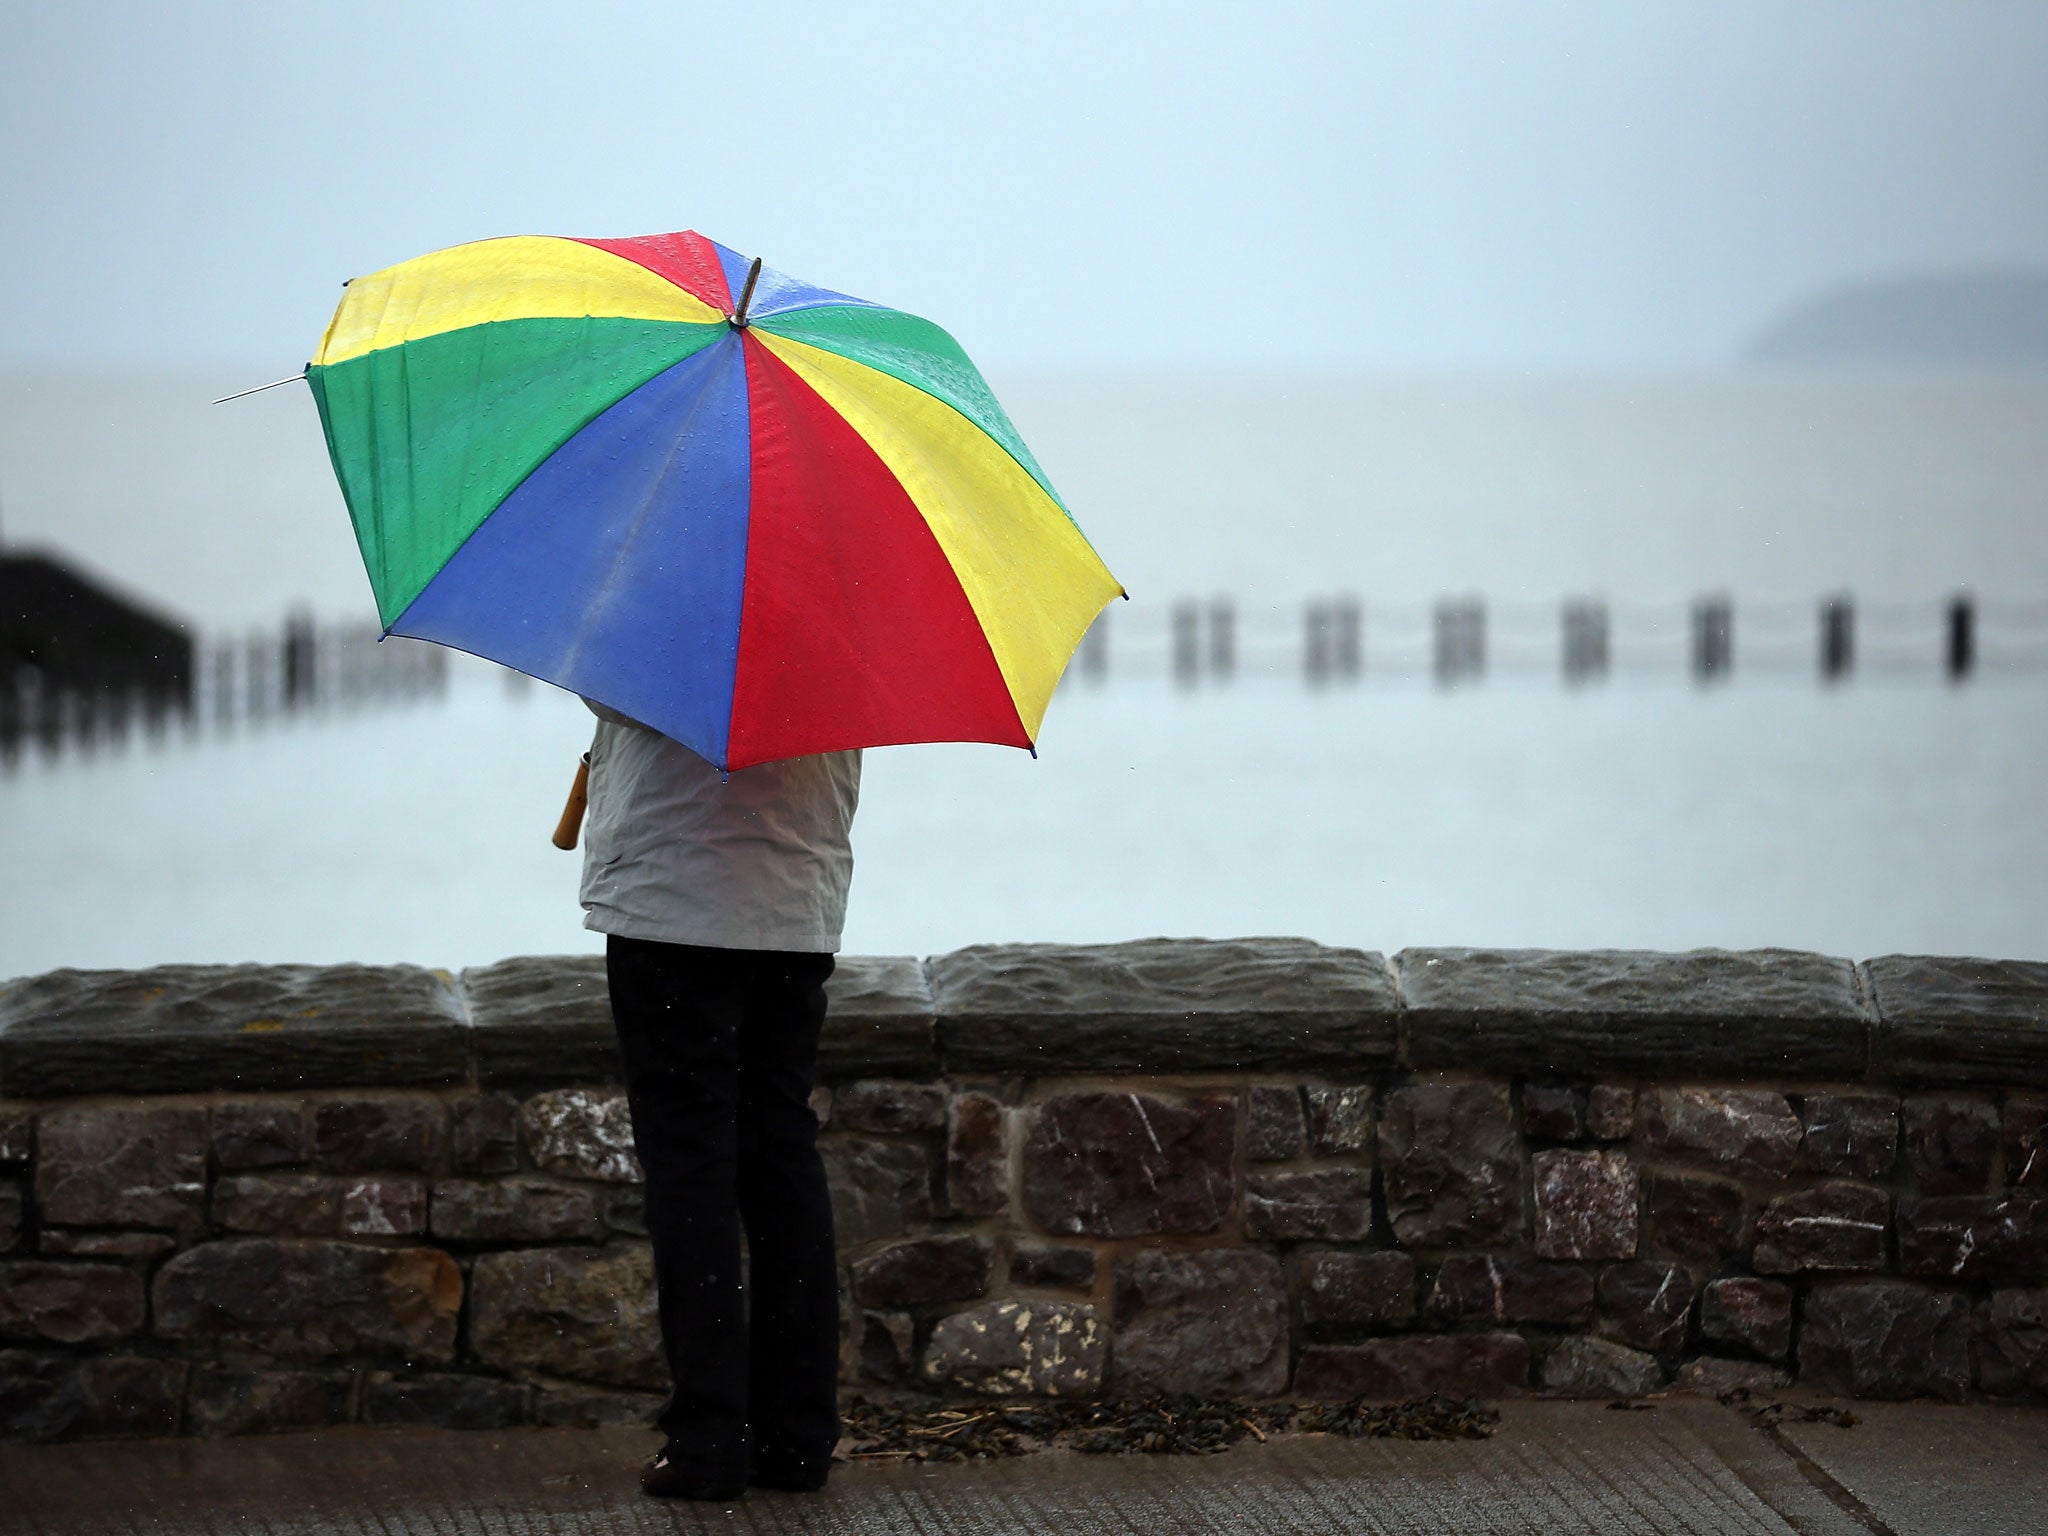 A woman shelters under a umbrella as the rain falls on the seafront on May 14, 2013 in Weston-Super-Mare, England.